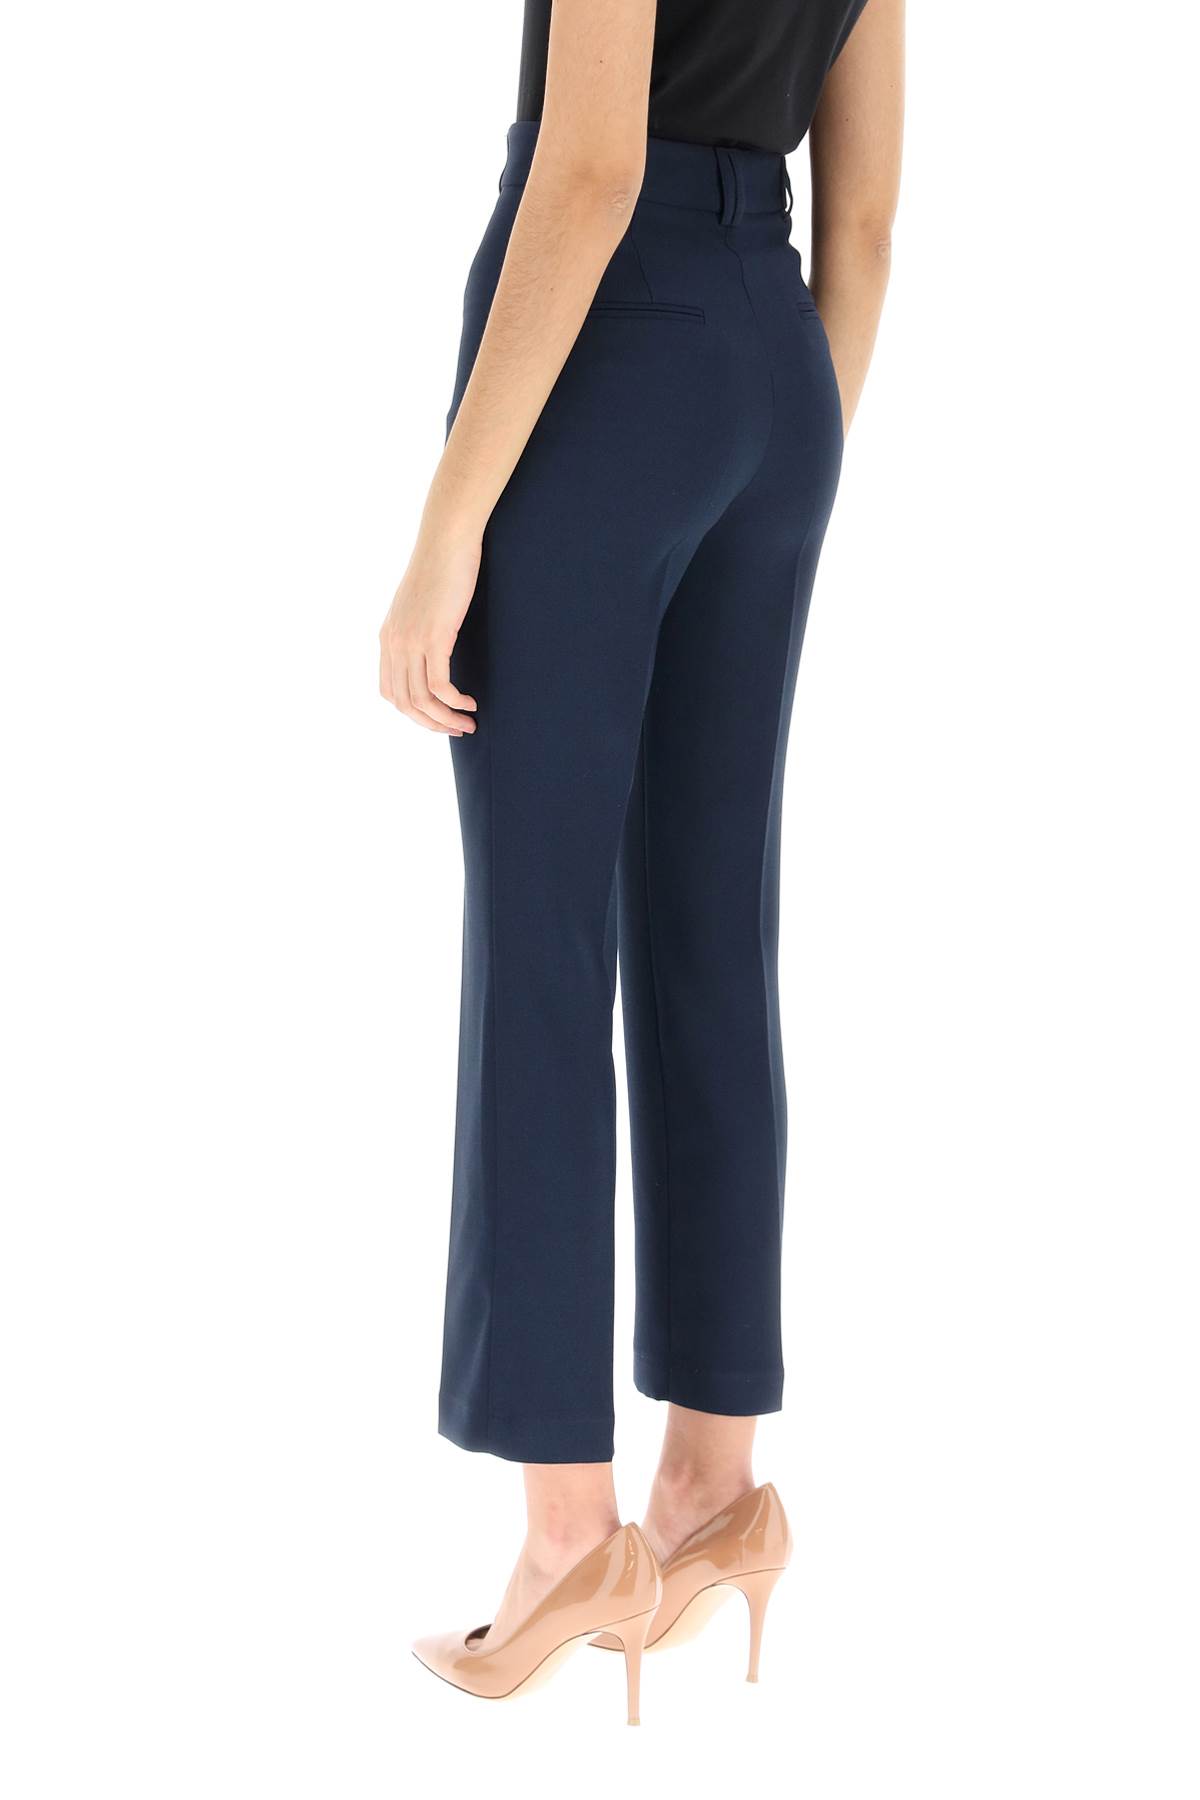 Shop Hebe Studio Loulou Cady Trousers In Navy (blue)